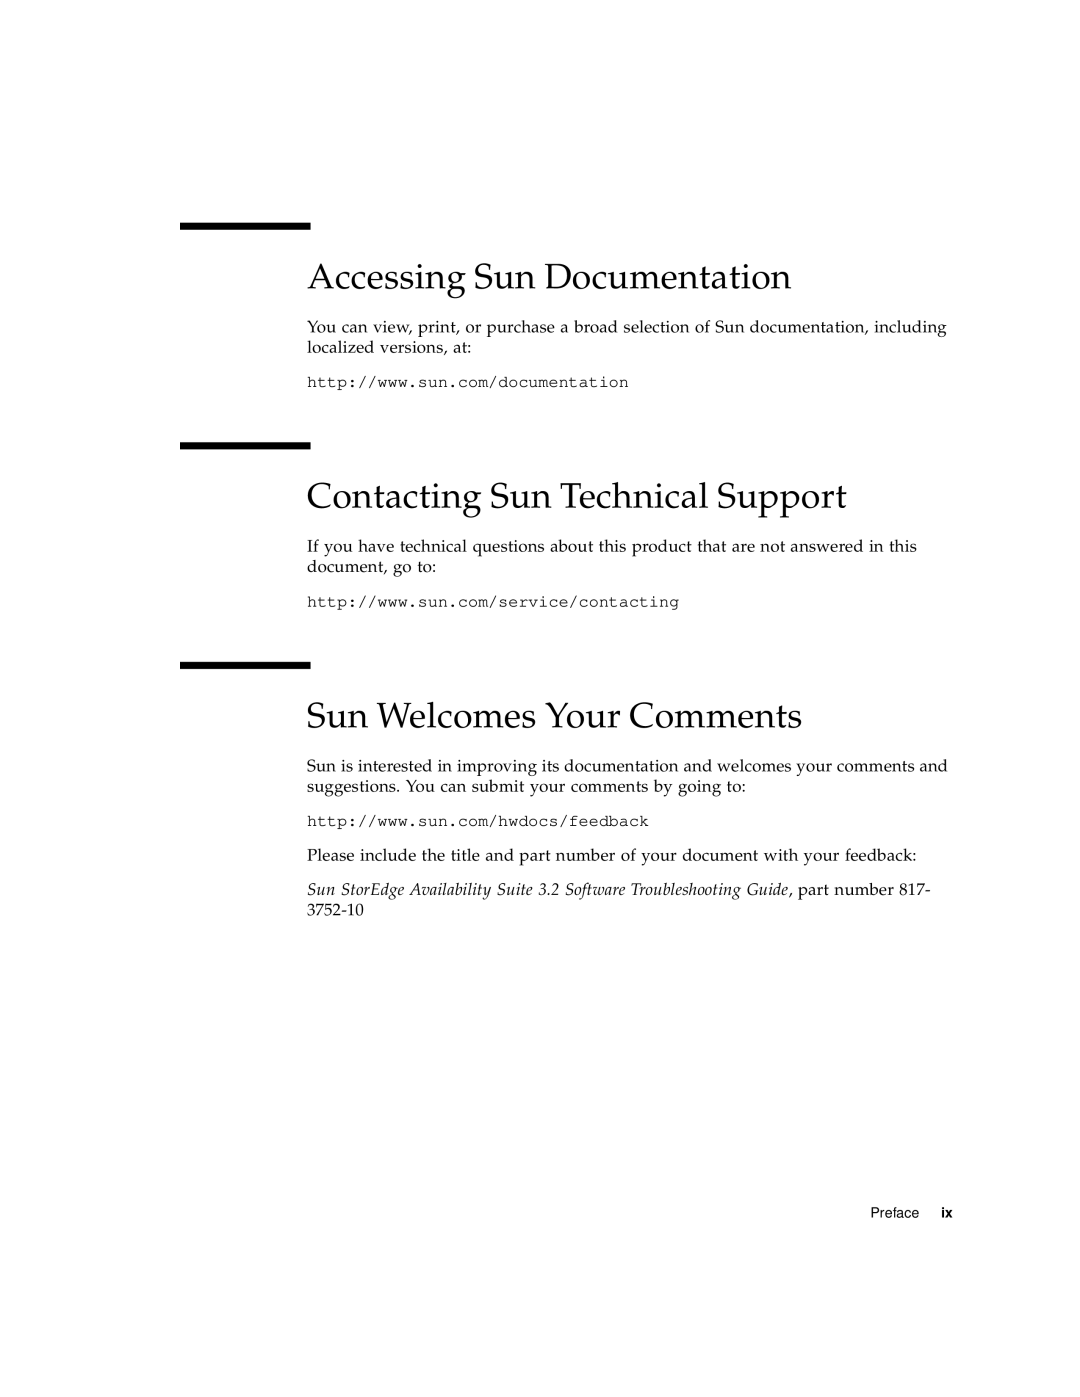 Sun Microsystems 3.2 manual Accessing Sun Documentation, Contacting Sun Technical Support, Sun Welcomes Your Comments 